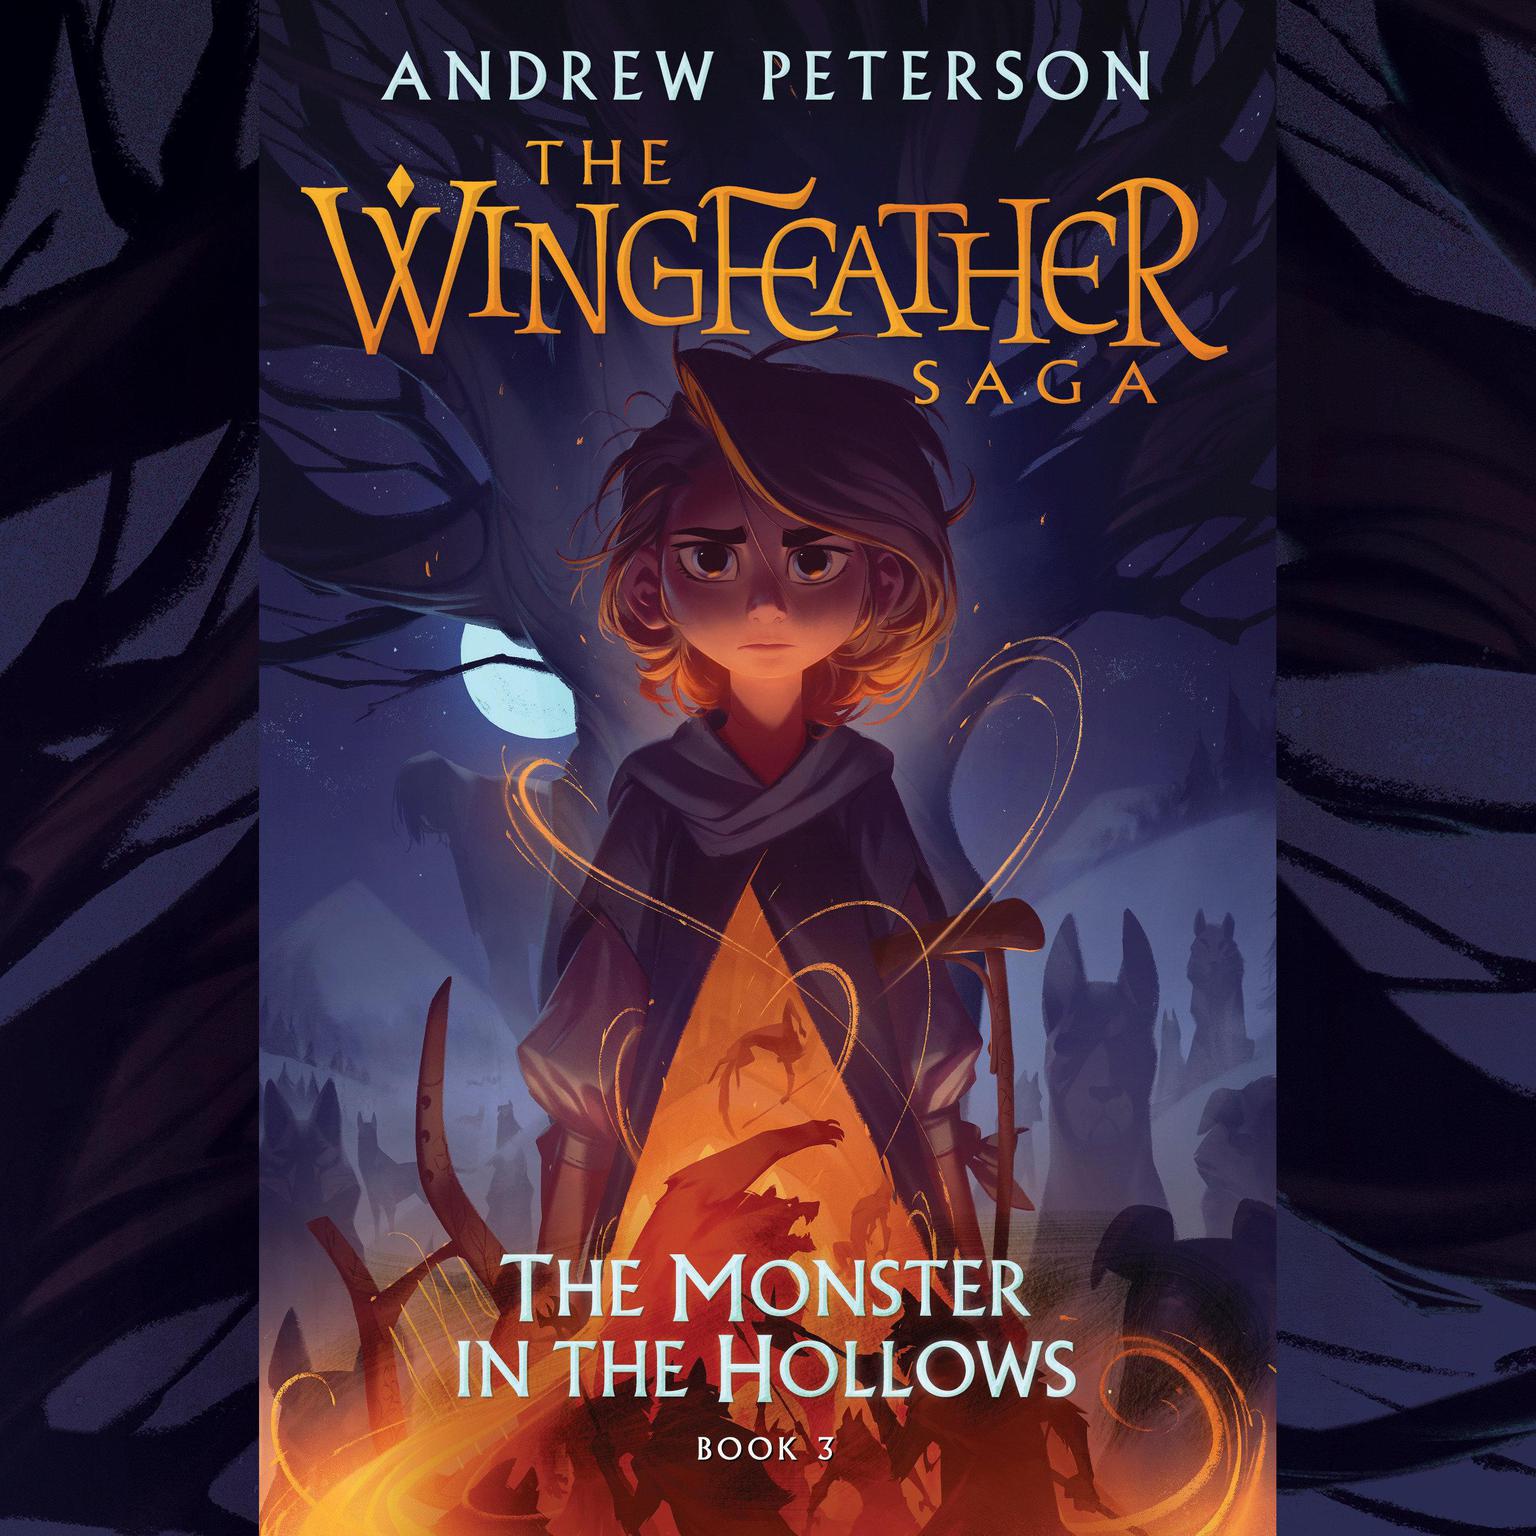 The Monster in the Hollows: The Wingfeather Saga Book 3 Audiobook, by Andrew Peterson